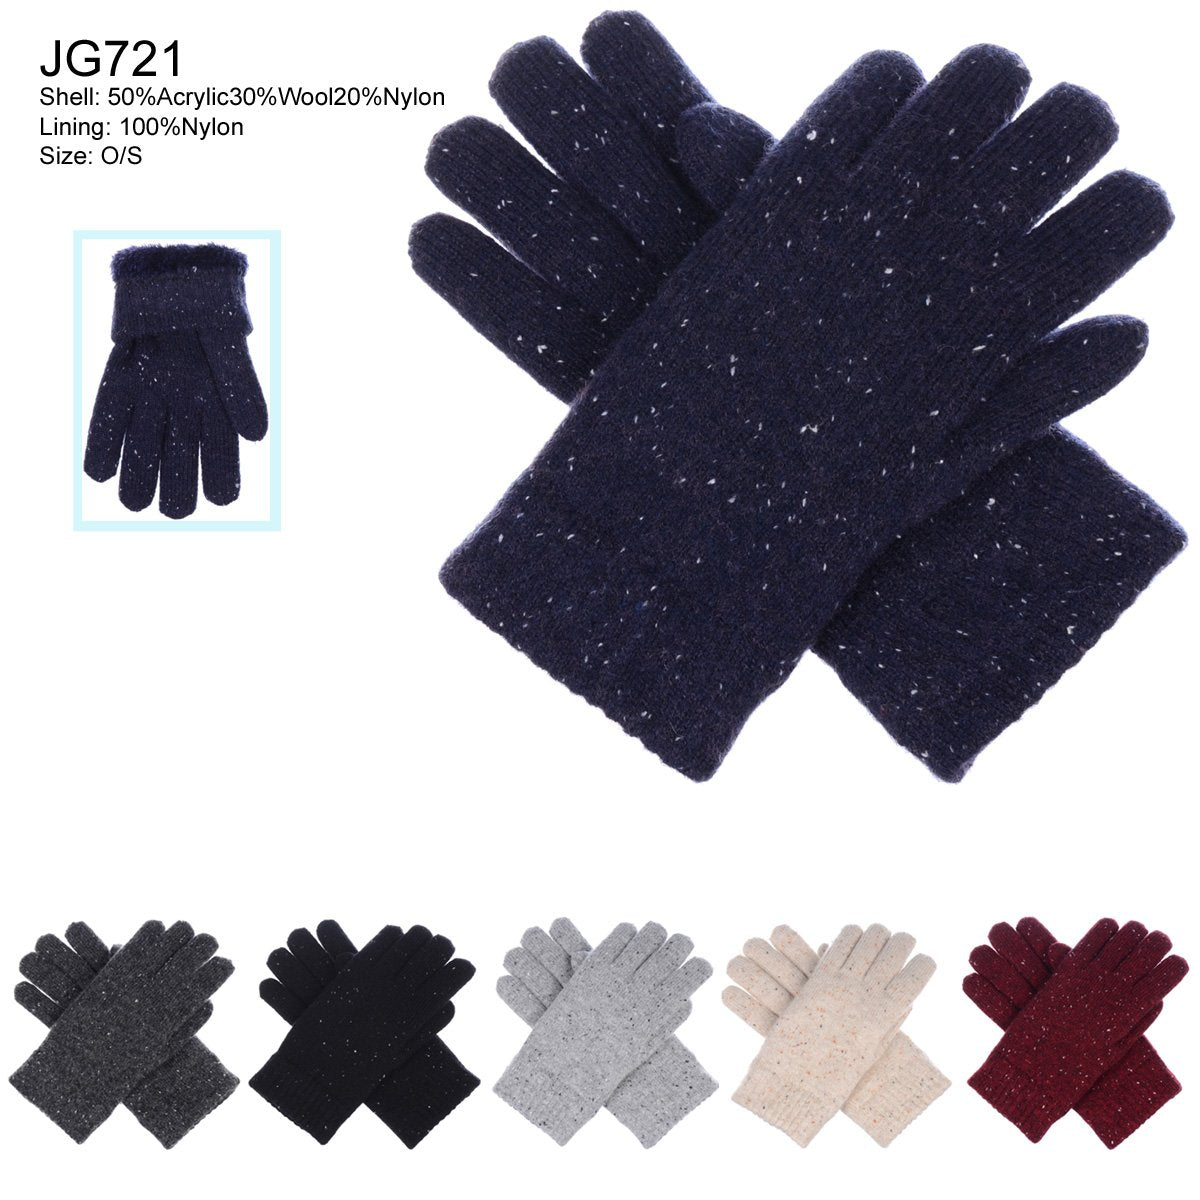 Speckled Knitted Gloves W/ Chenille Lining - 12Pc Set